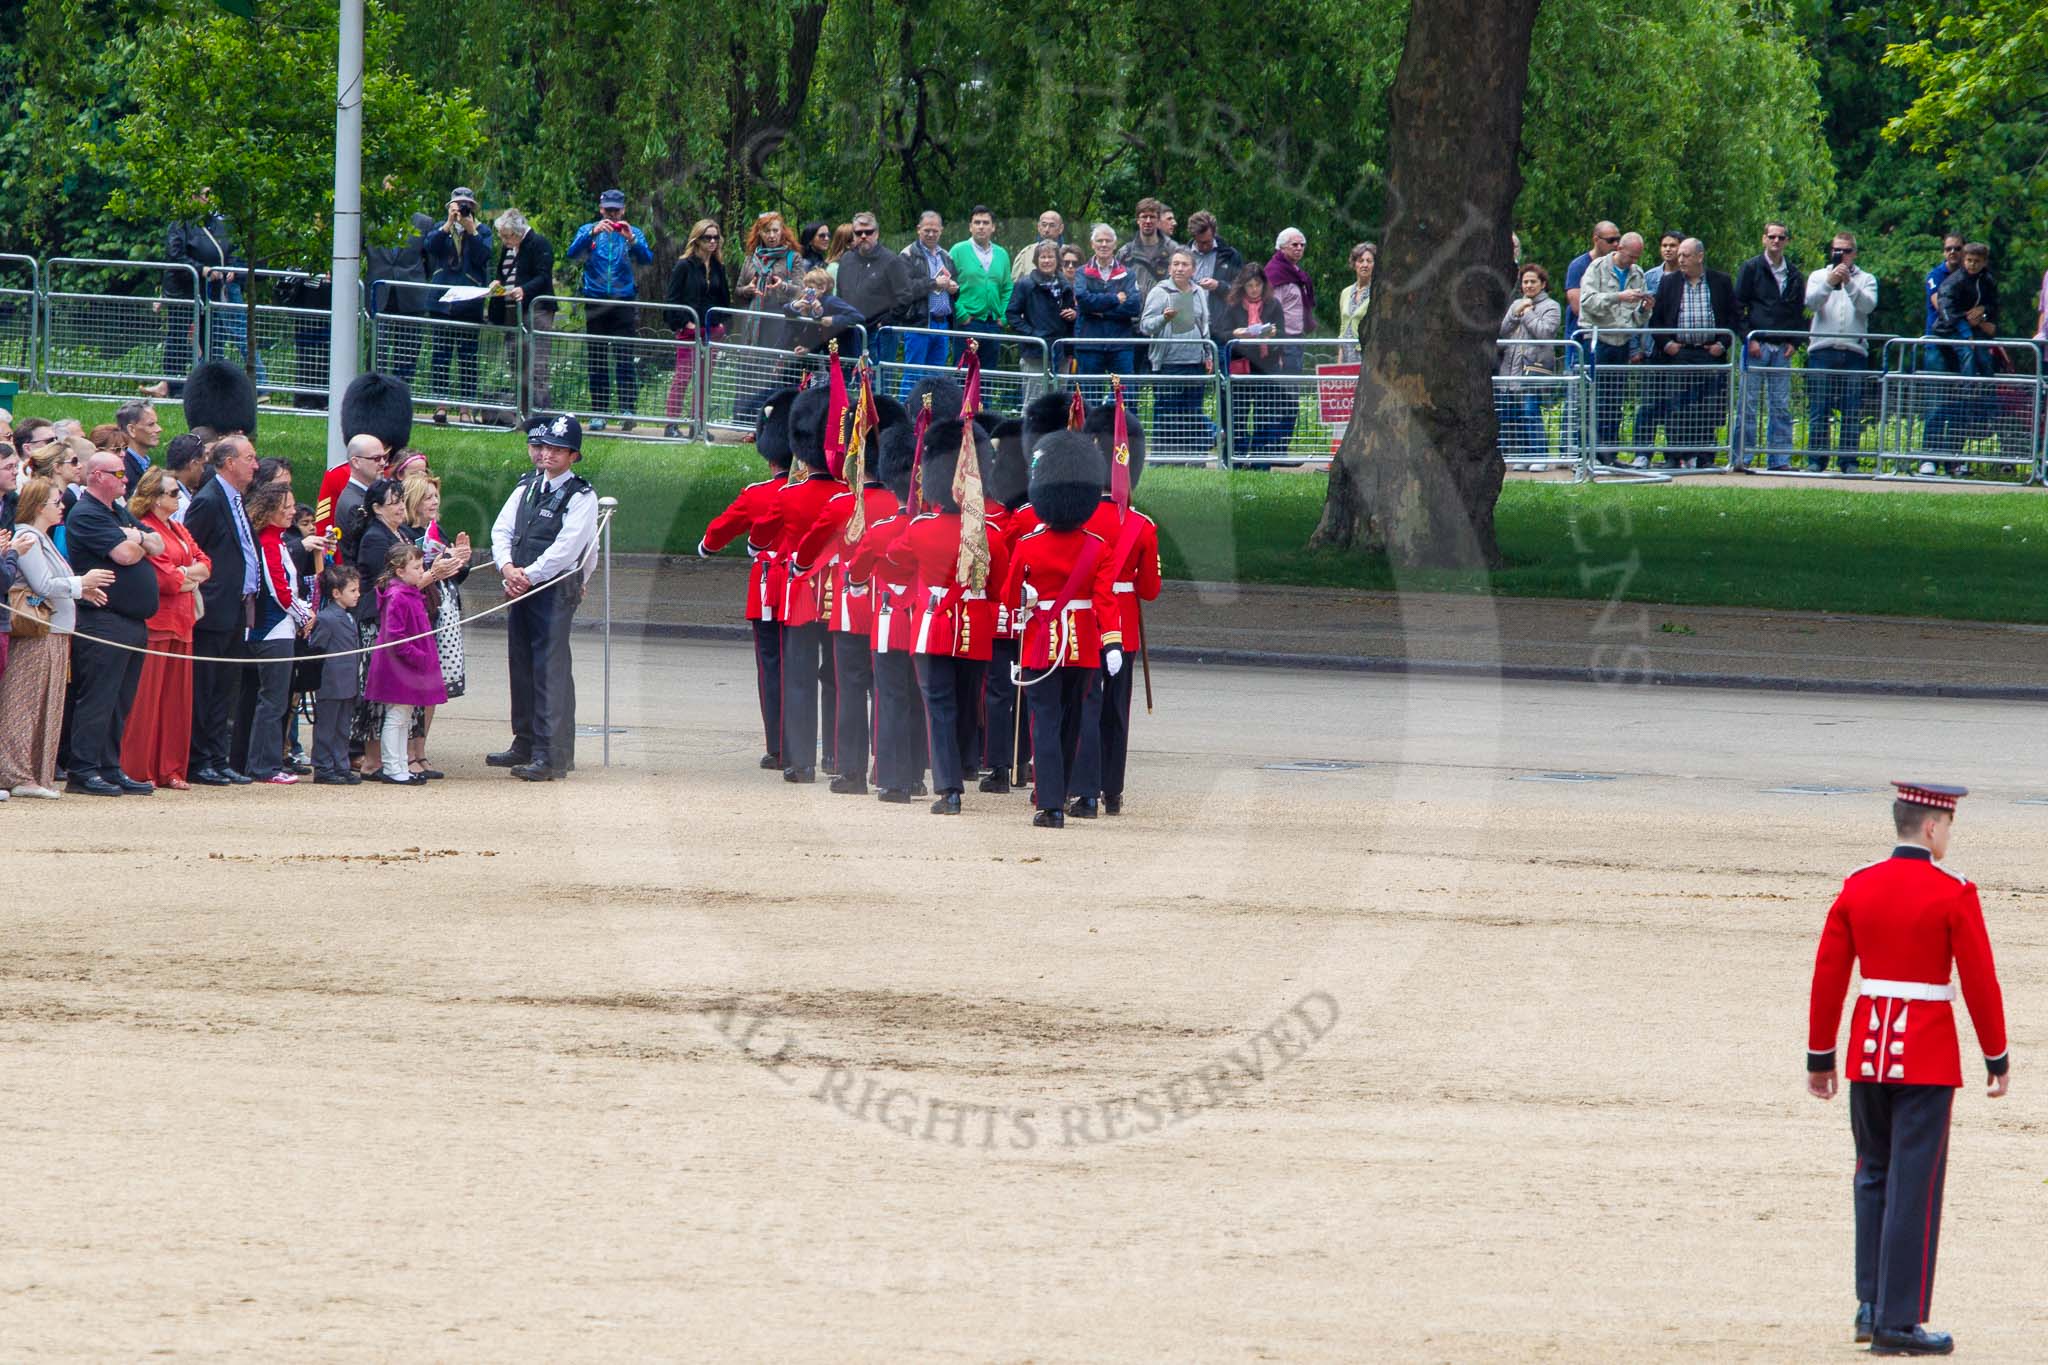 The Colonel's Review 2013.
Horse Guards Parade, Westminster,
London SW1,

United Kingdom,
on 08 June 2013 at 12:15, image #886